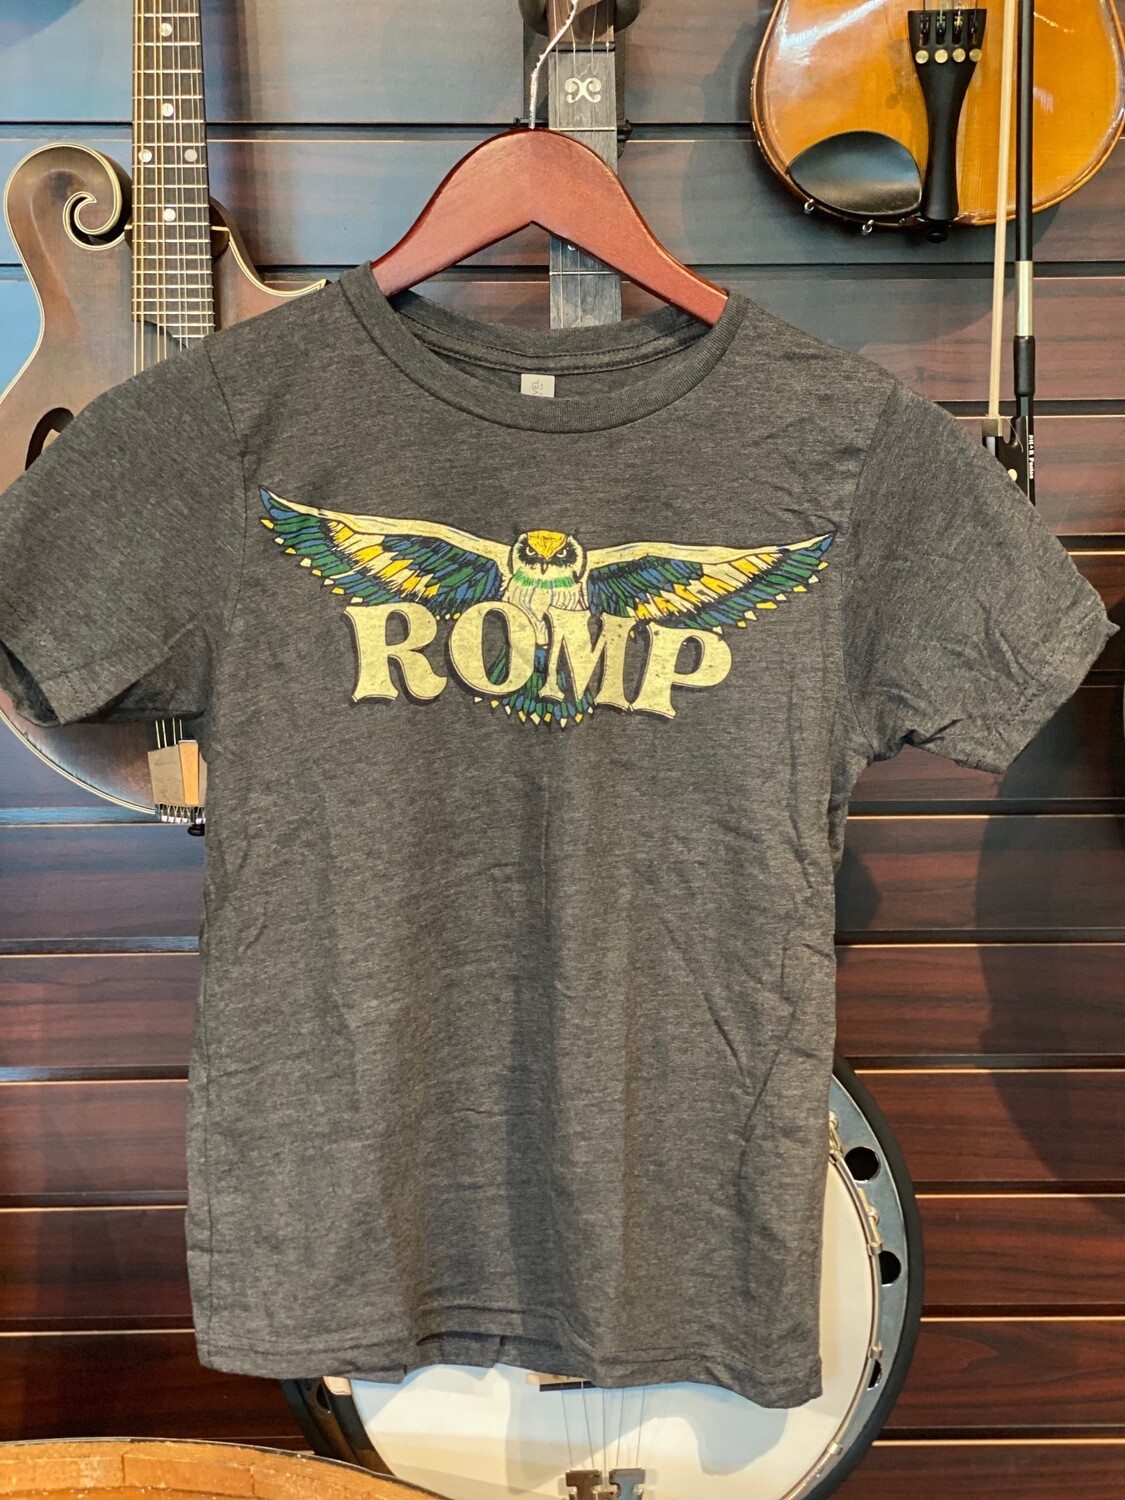 ROMP Toddler Charcoal Tee 4T